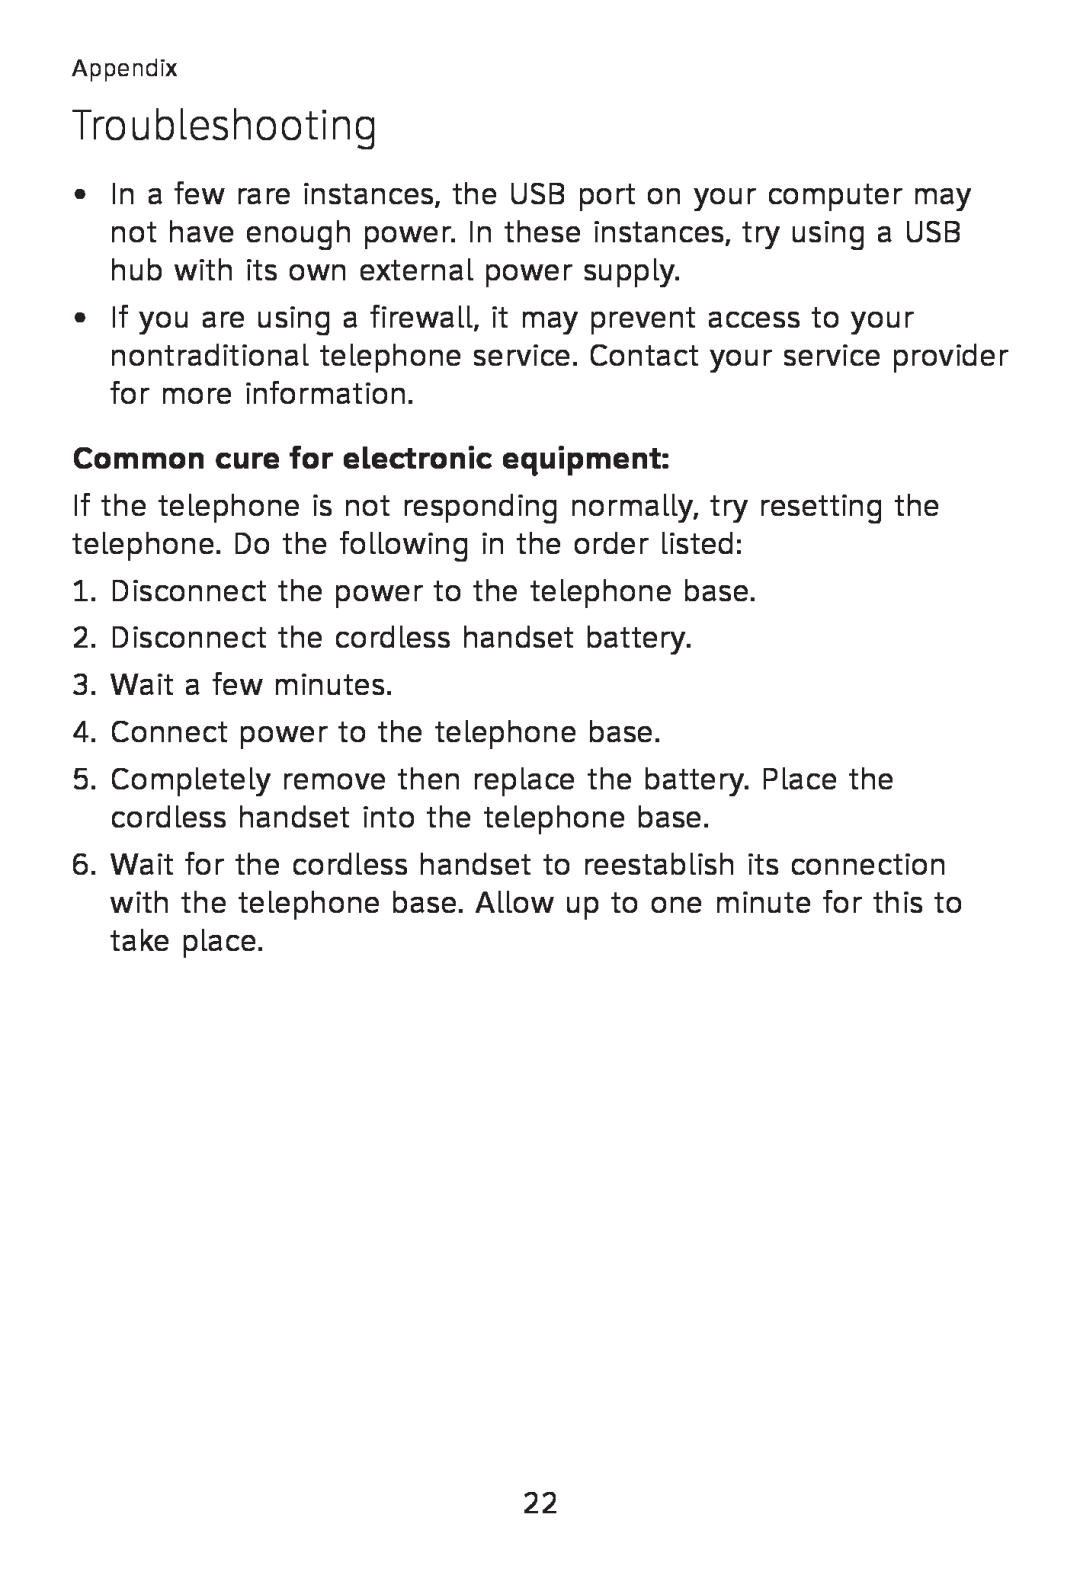 AT&T TL32200, TL32300, TL32100, TL30100 user manual Common cure for electronic equipment, Troubleshooting 